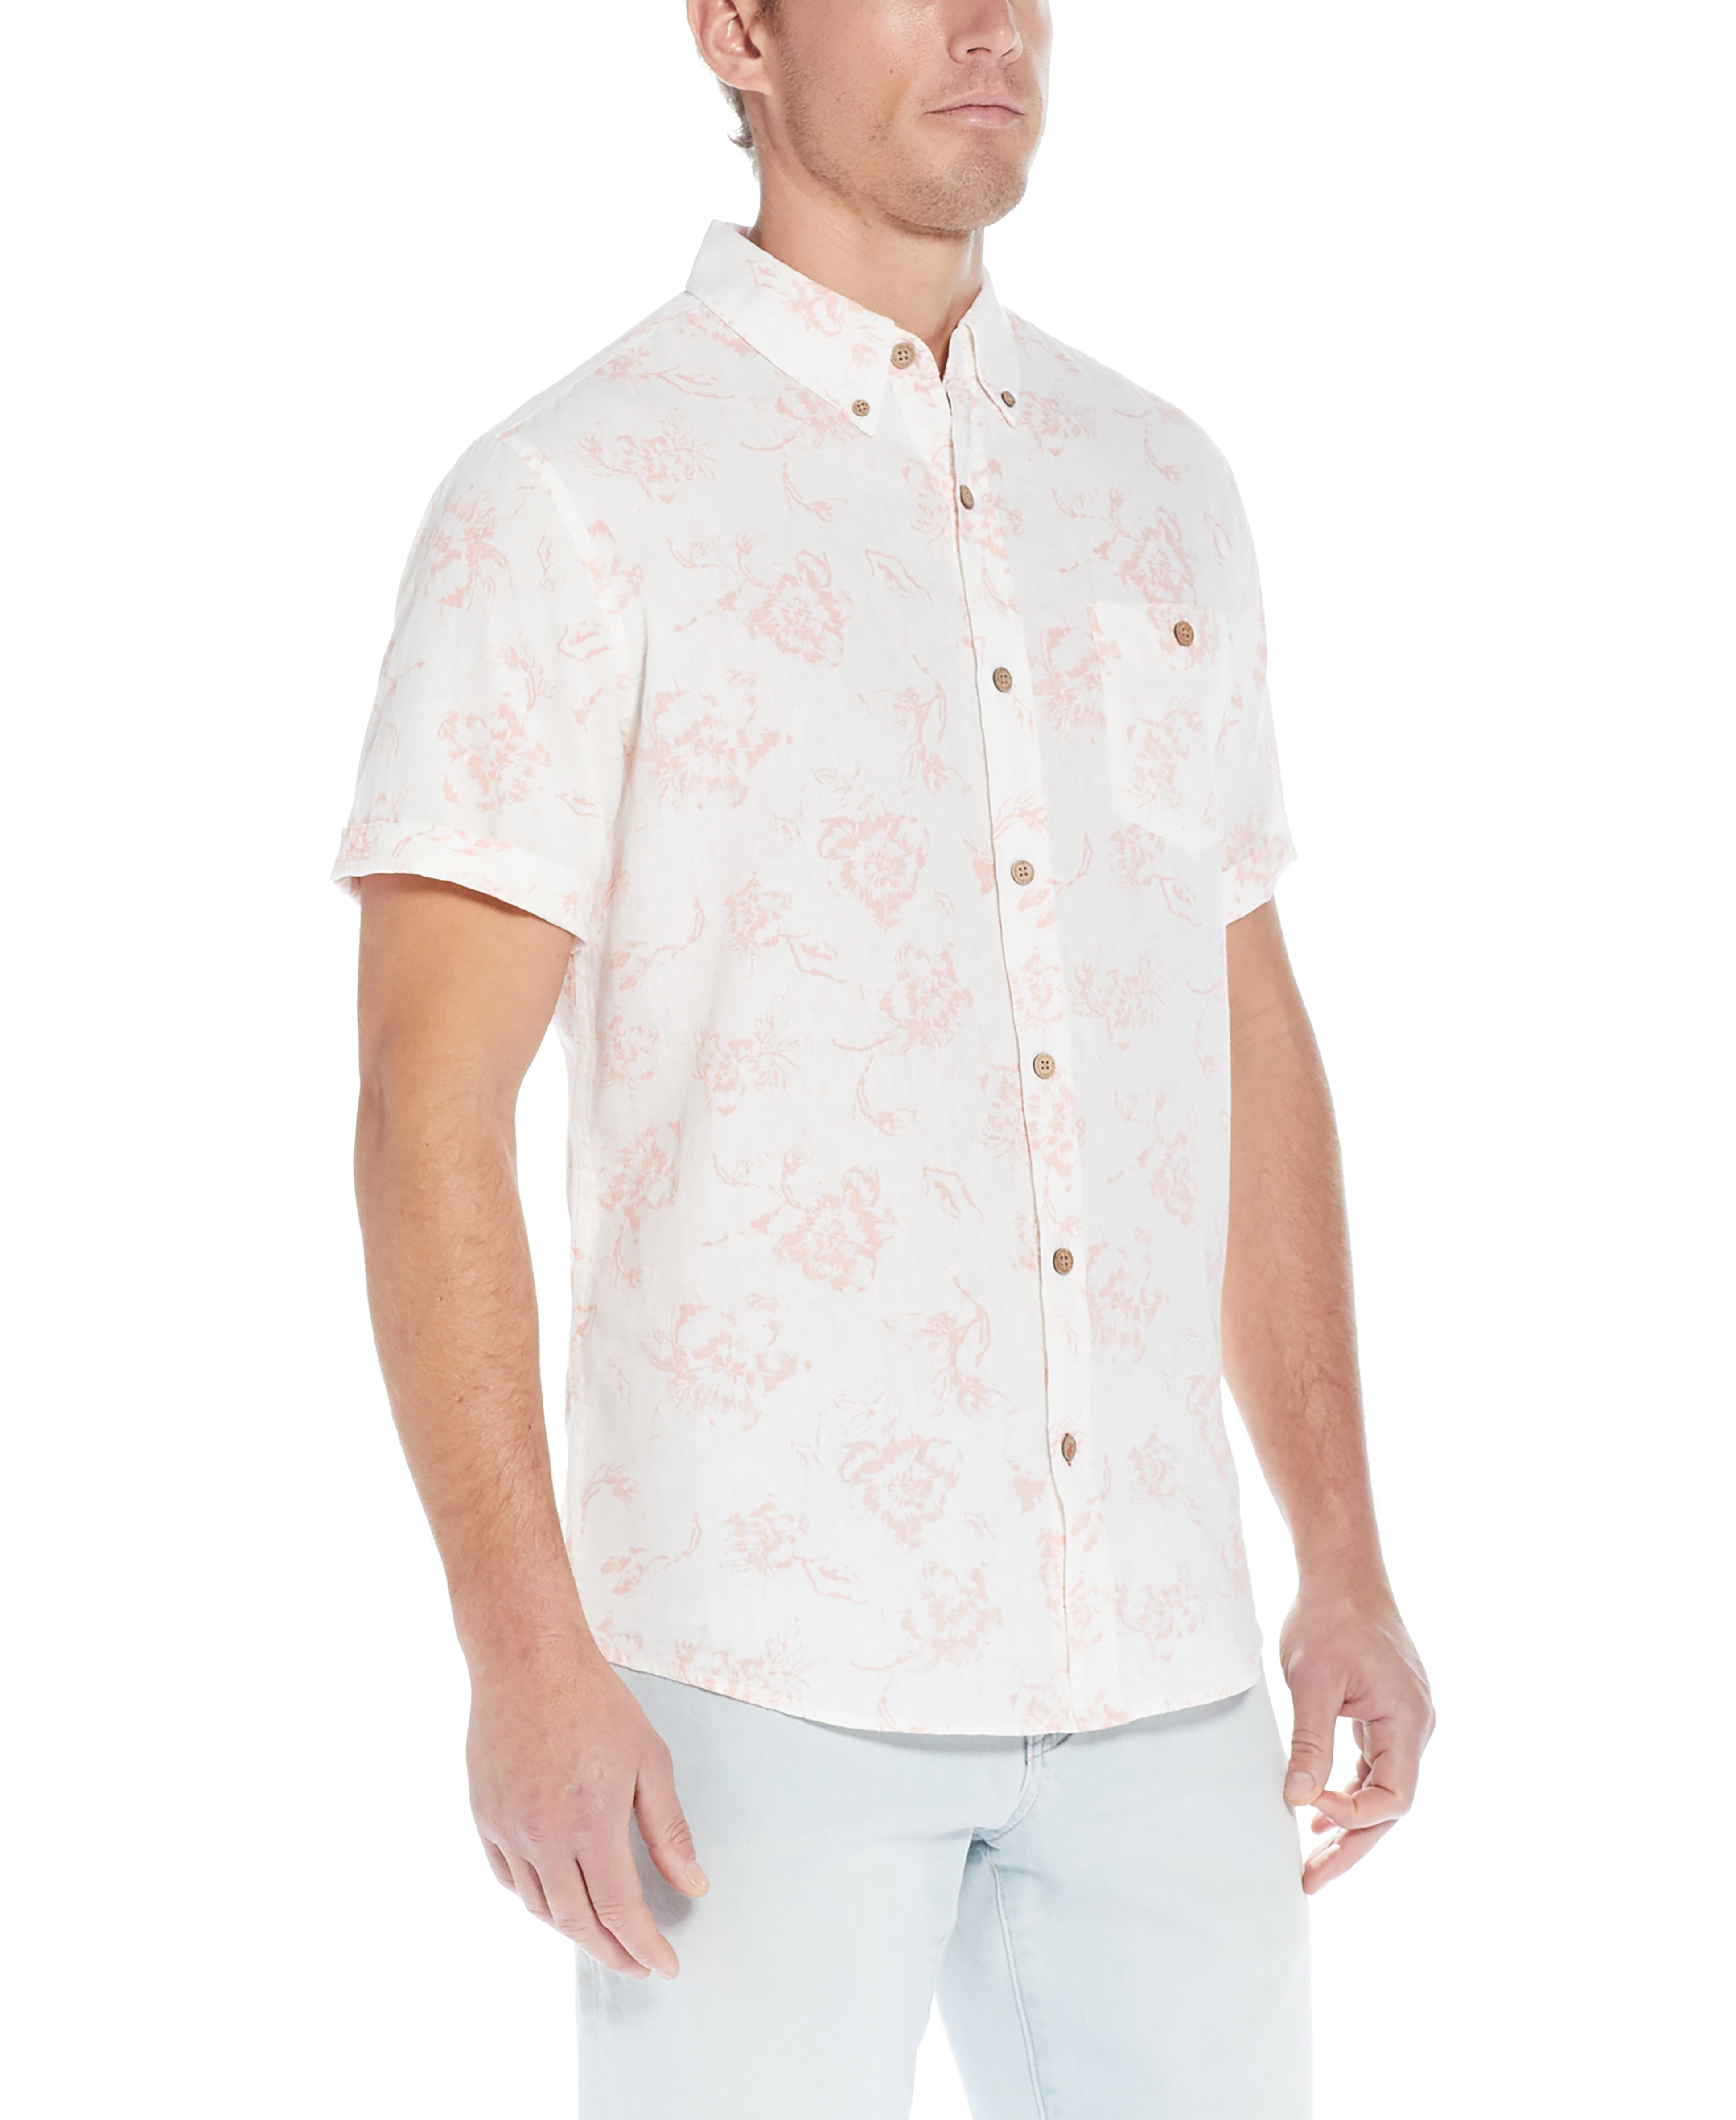 FLORAL PRINTED SHIRT in DUSTED CLAY